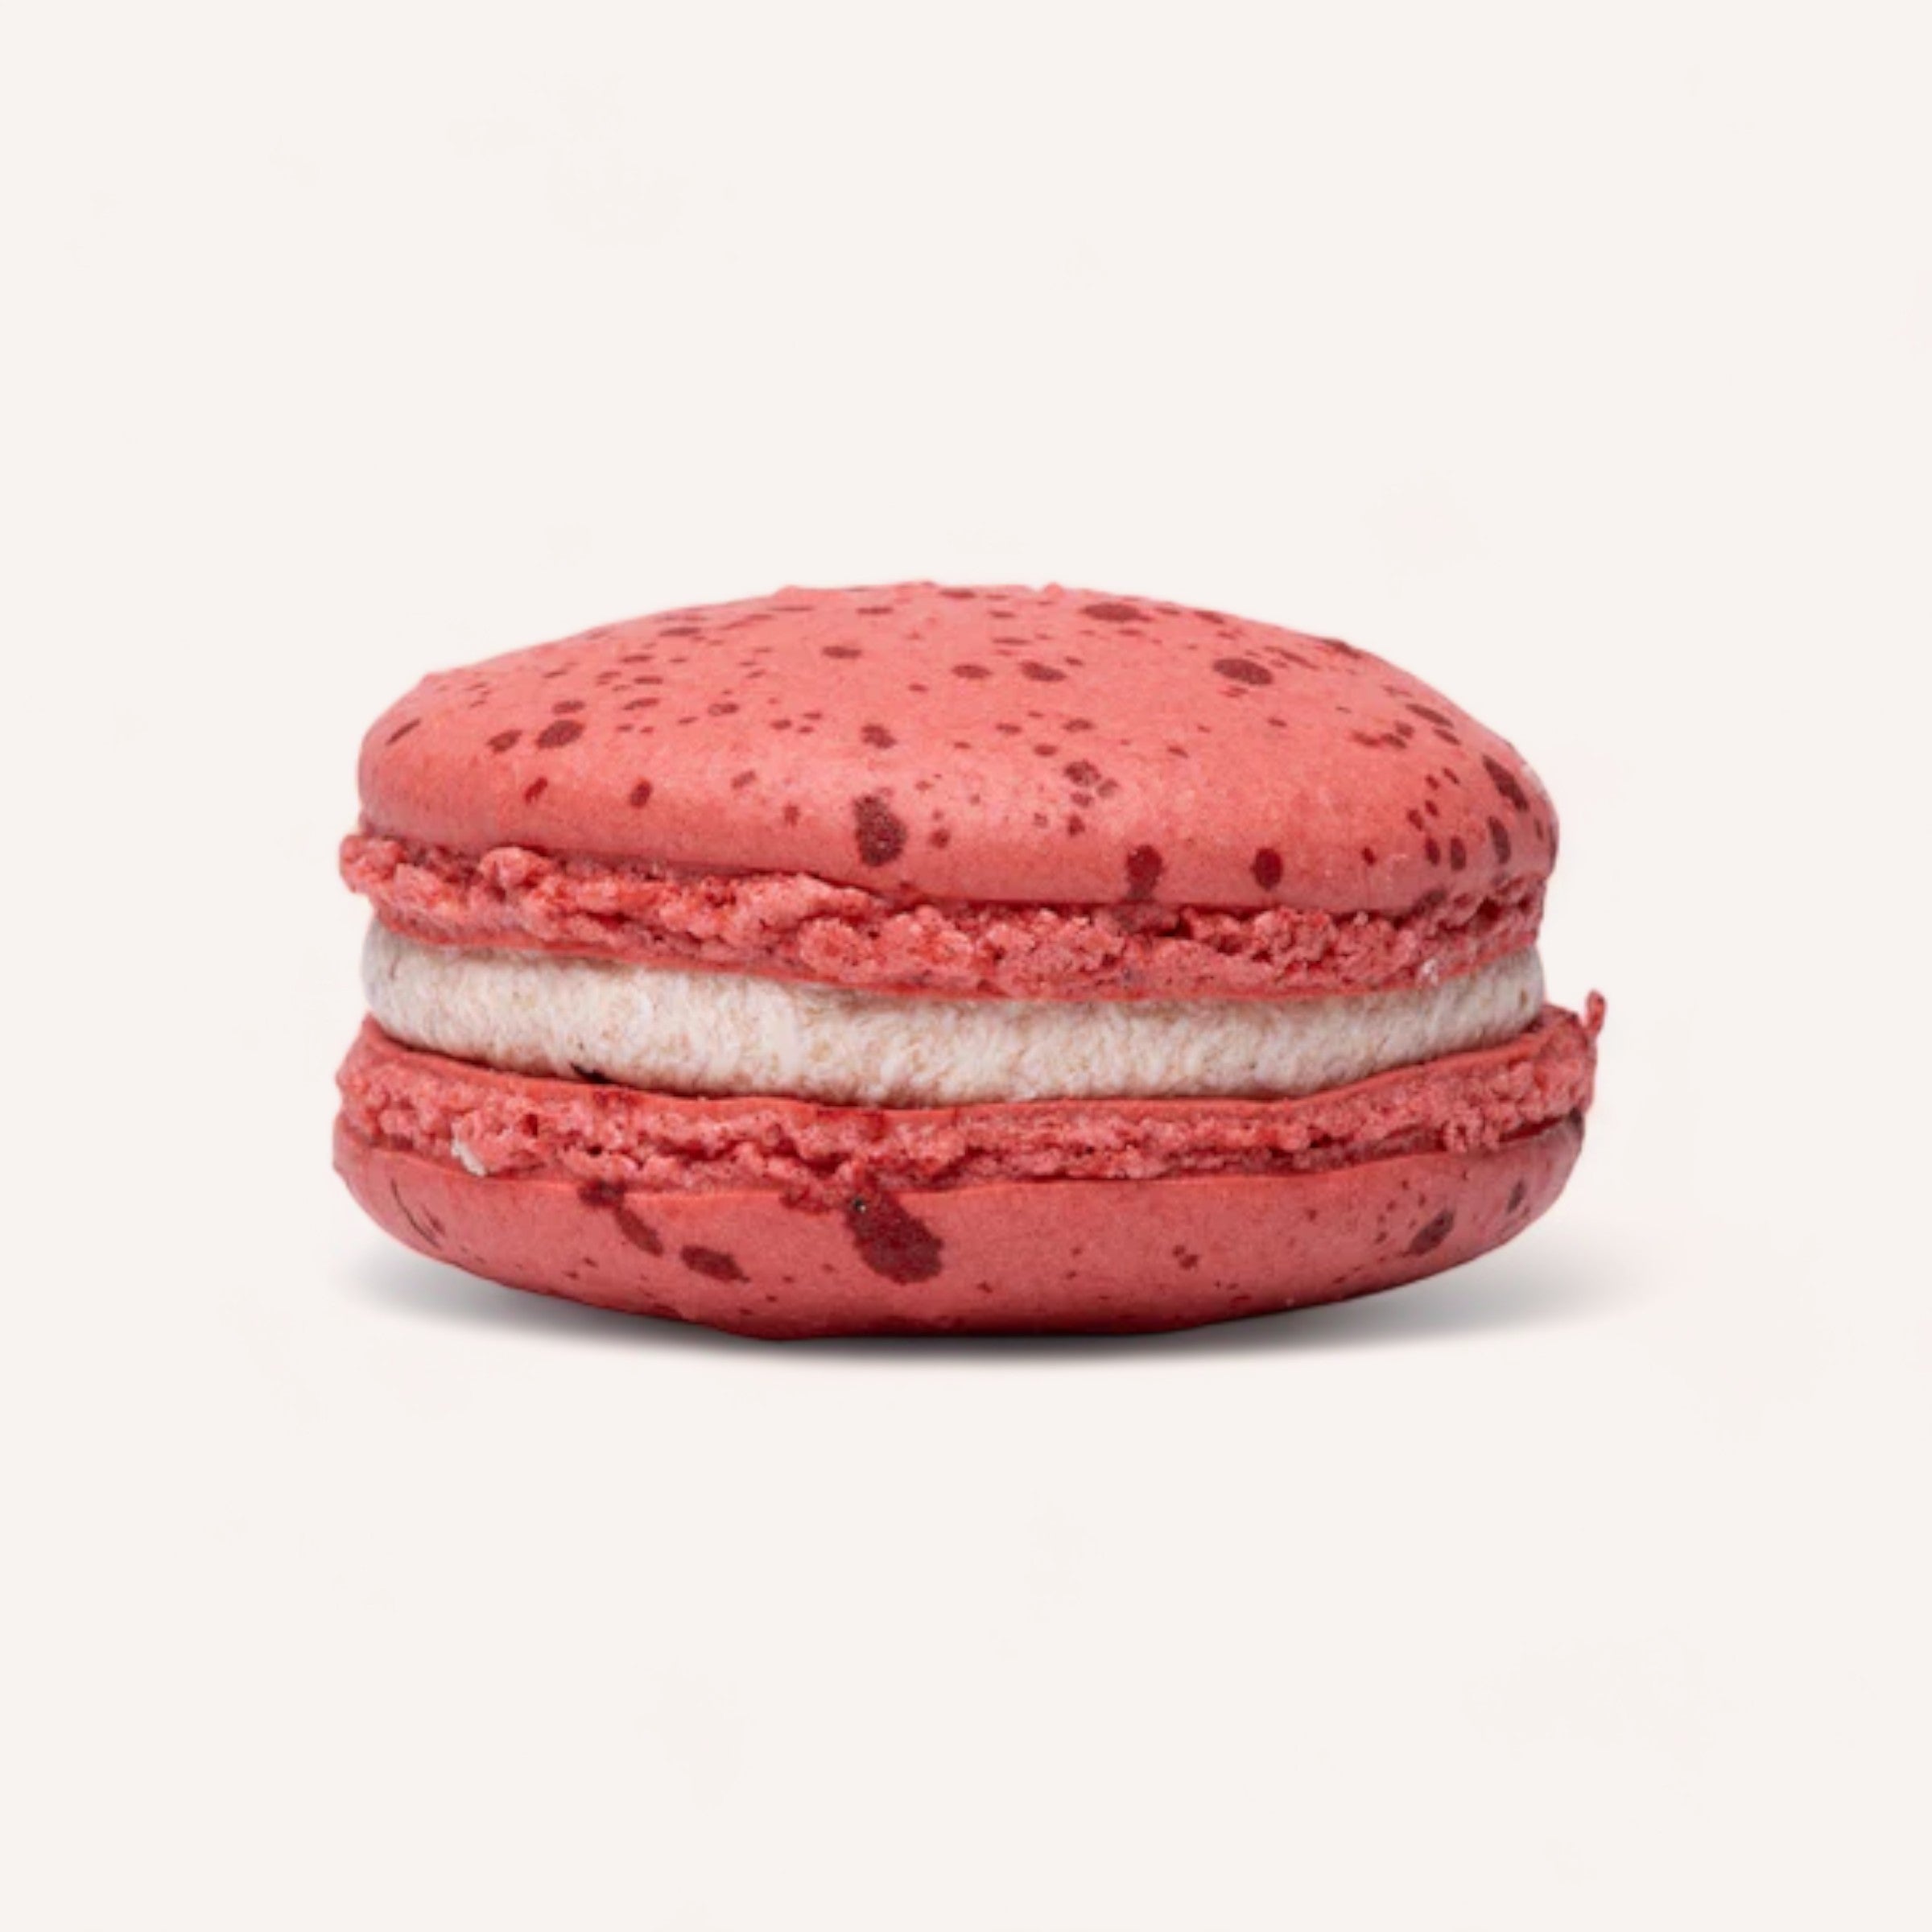 A vibrant red, handmade Box of 12 Macarons with a creamy filling, perfectly round with a speckled surface by J'aime les Macarons.